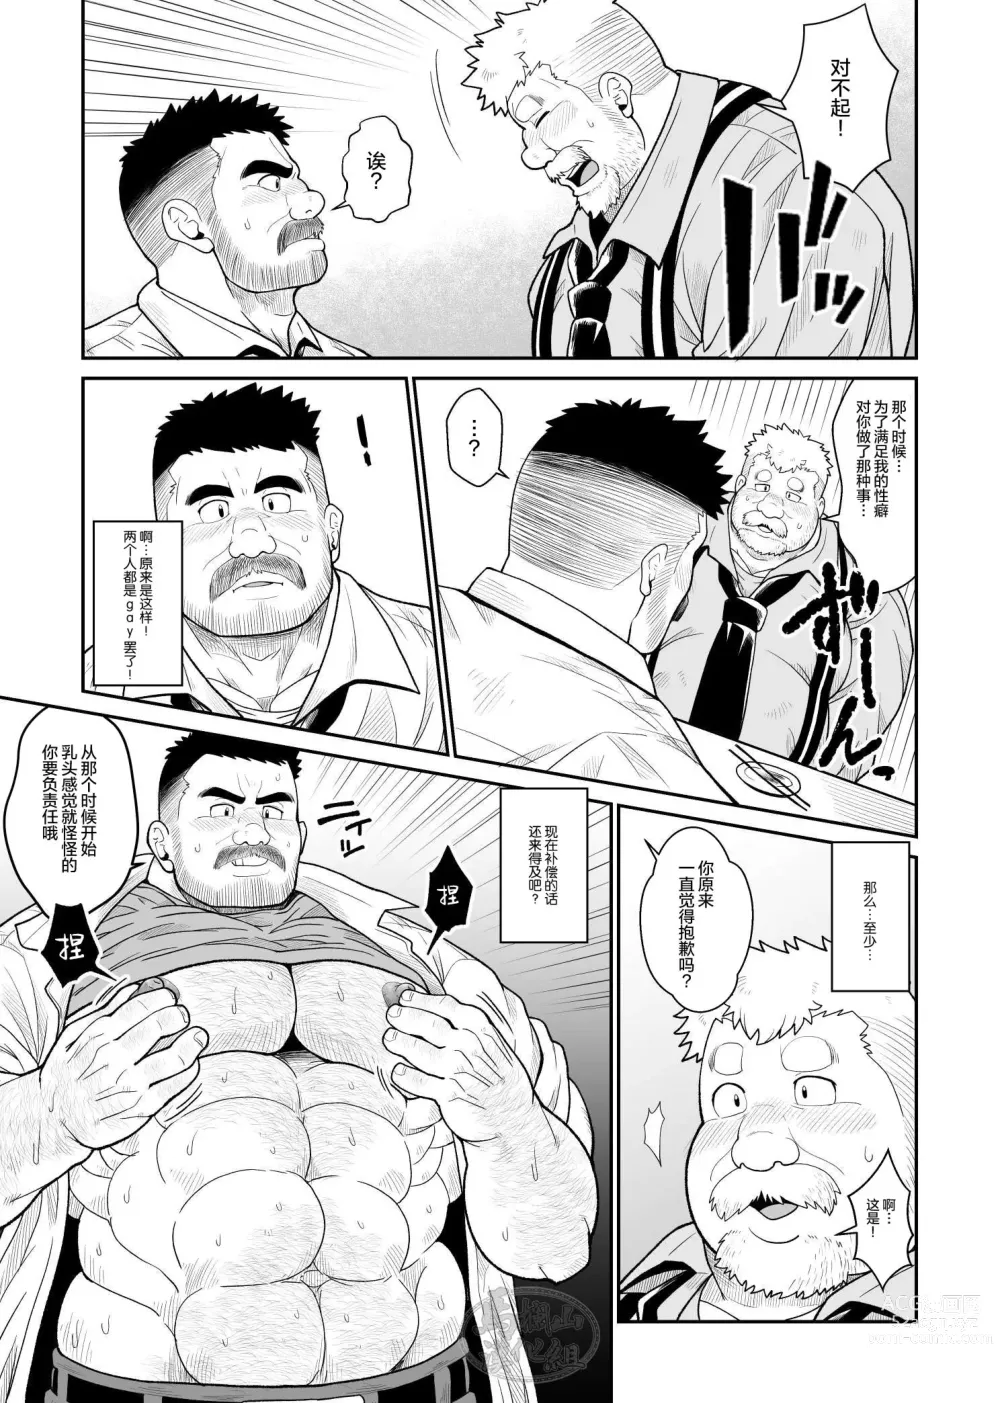 Page 14 of doujinshi 肉欲同学会